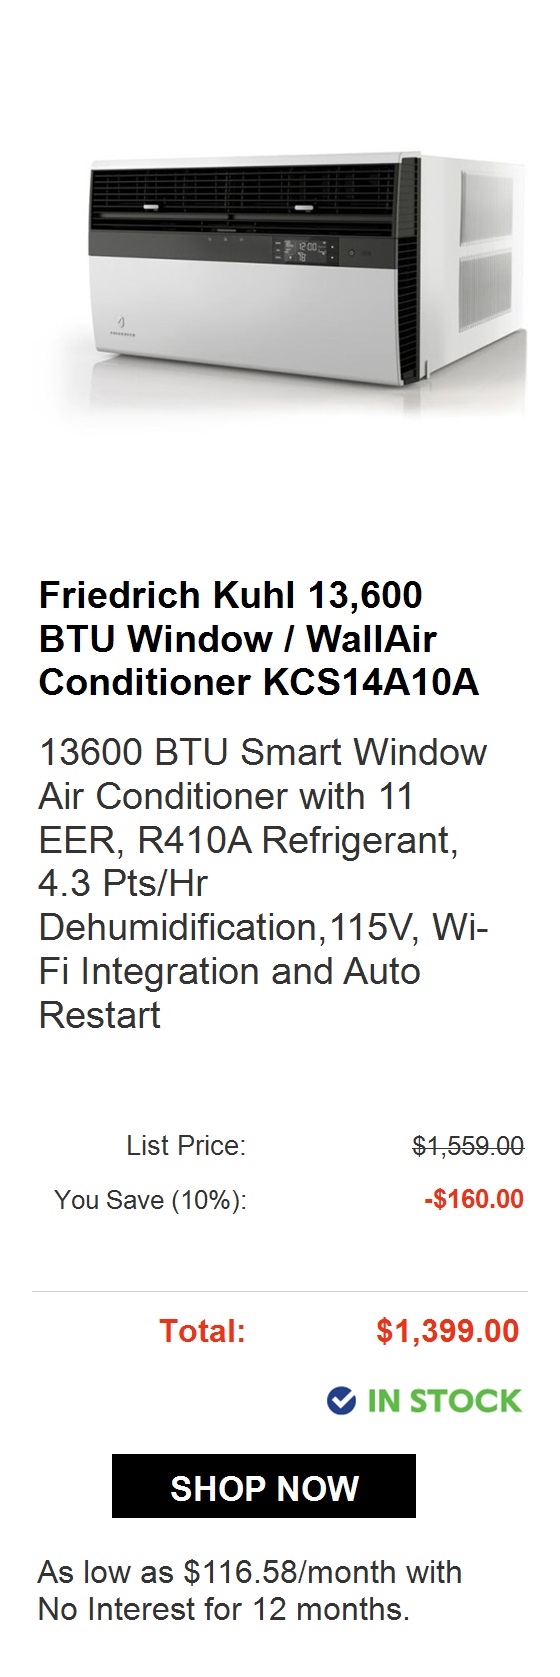  Friedrich Chill Premier 10,000 BTU Window WallAir Conditioner CC... Slide Out Chassis Smart Window Air Conditioner with QuietMaster Technology, Money Saver Setting, 8-Way Airflow Control, Washable Antimicrobial Air Filters, Check Filter Alert, Expan... List Price: ek You Save 10%: -$70.00 Rebate: -$50.00 After Rebate: $549.00 @ IN STOCK 